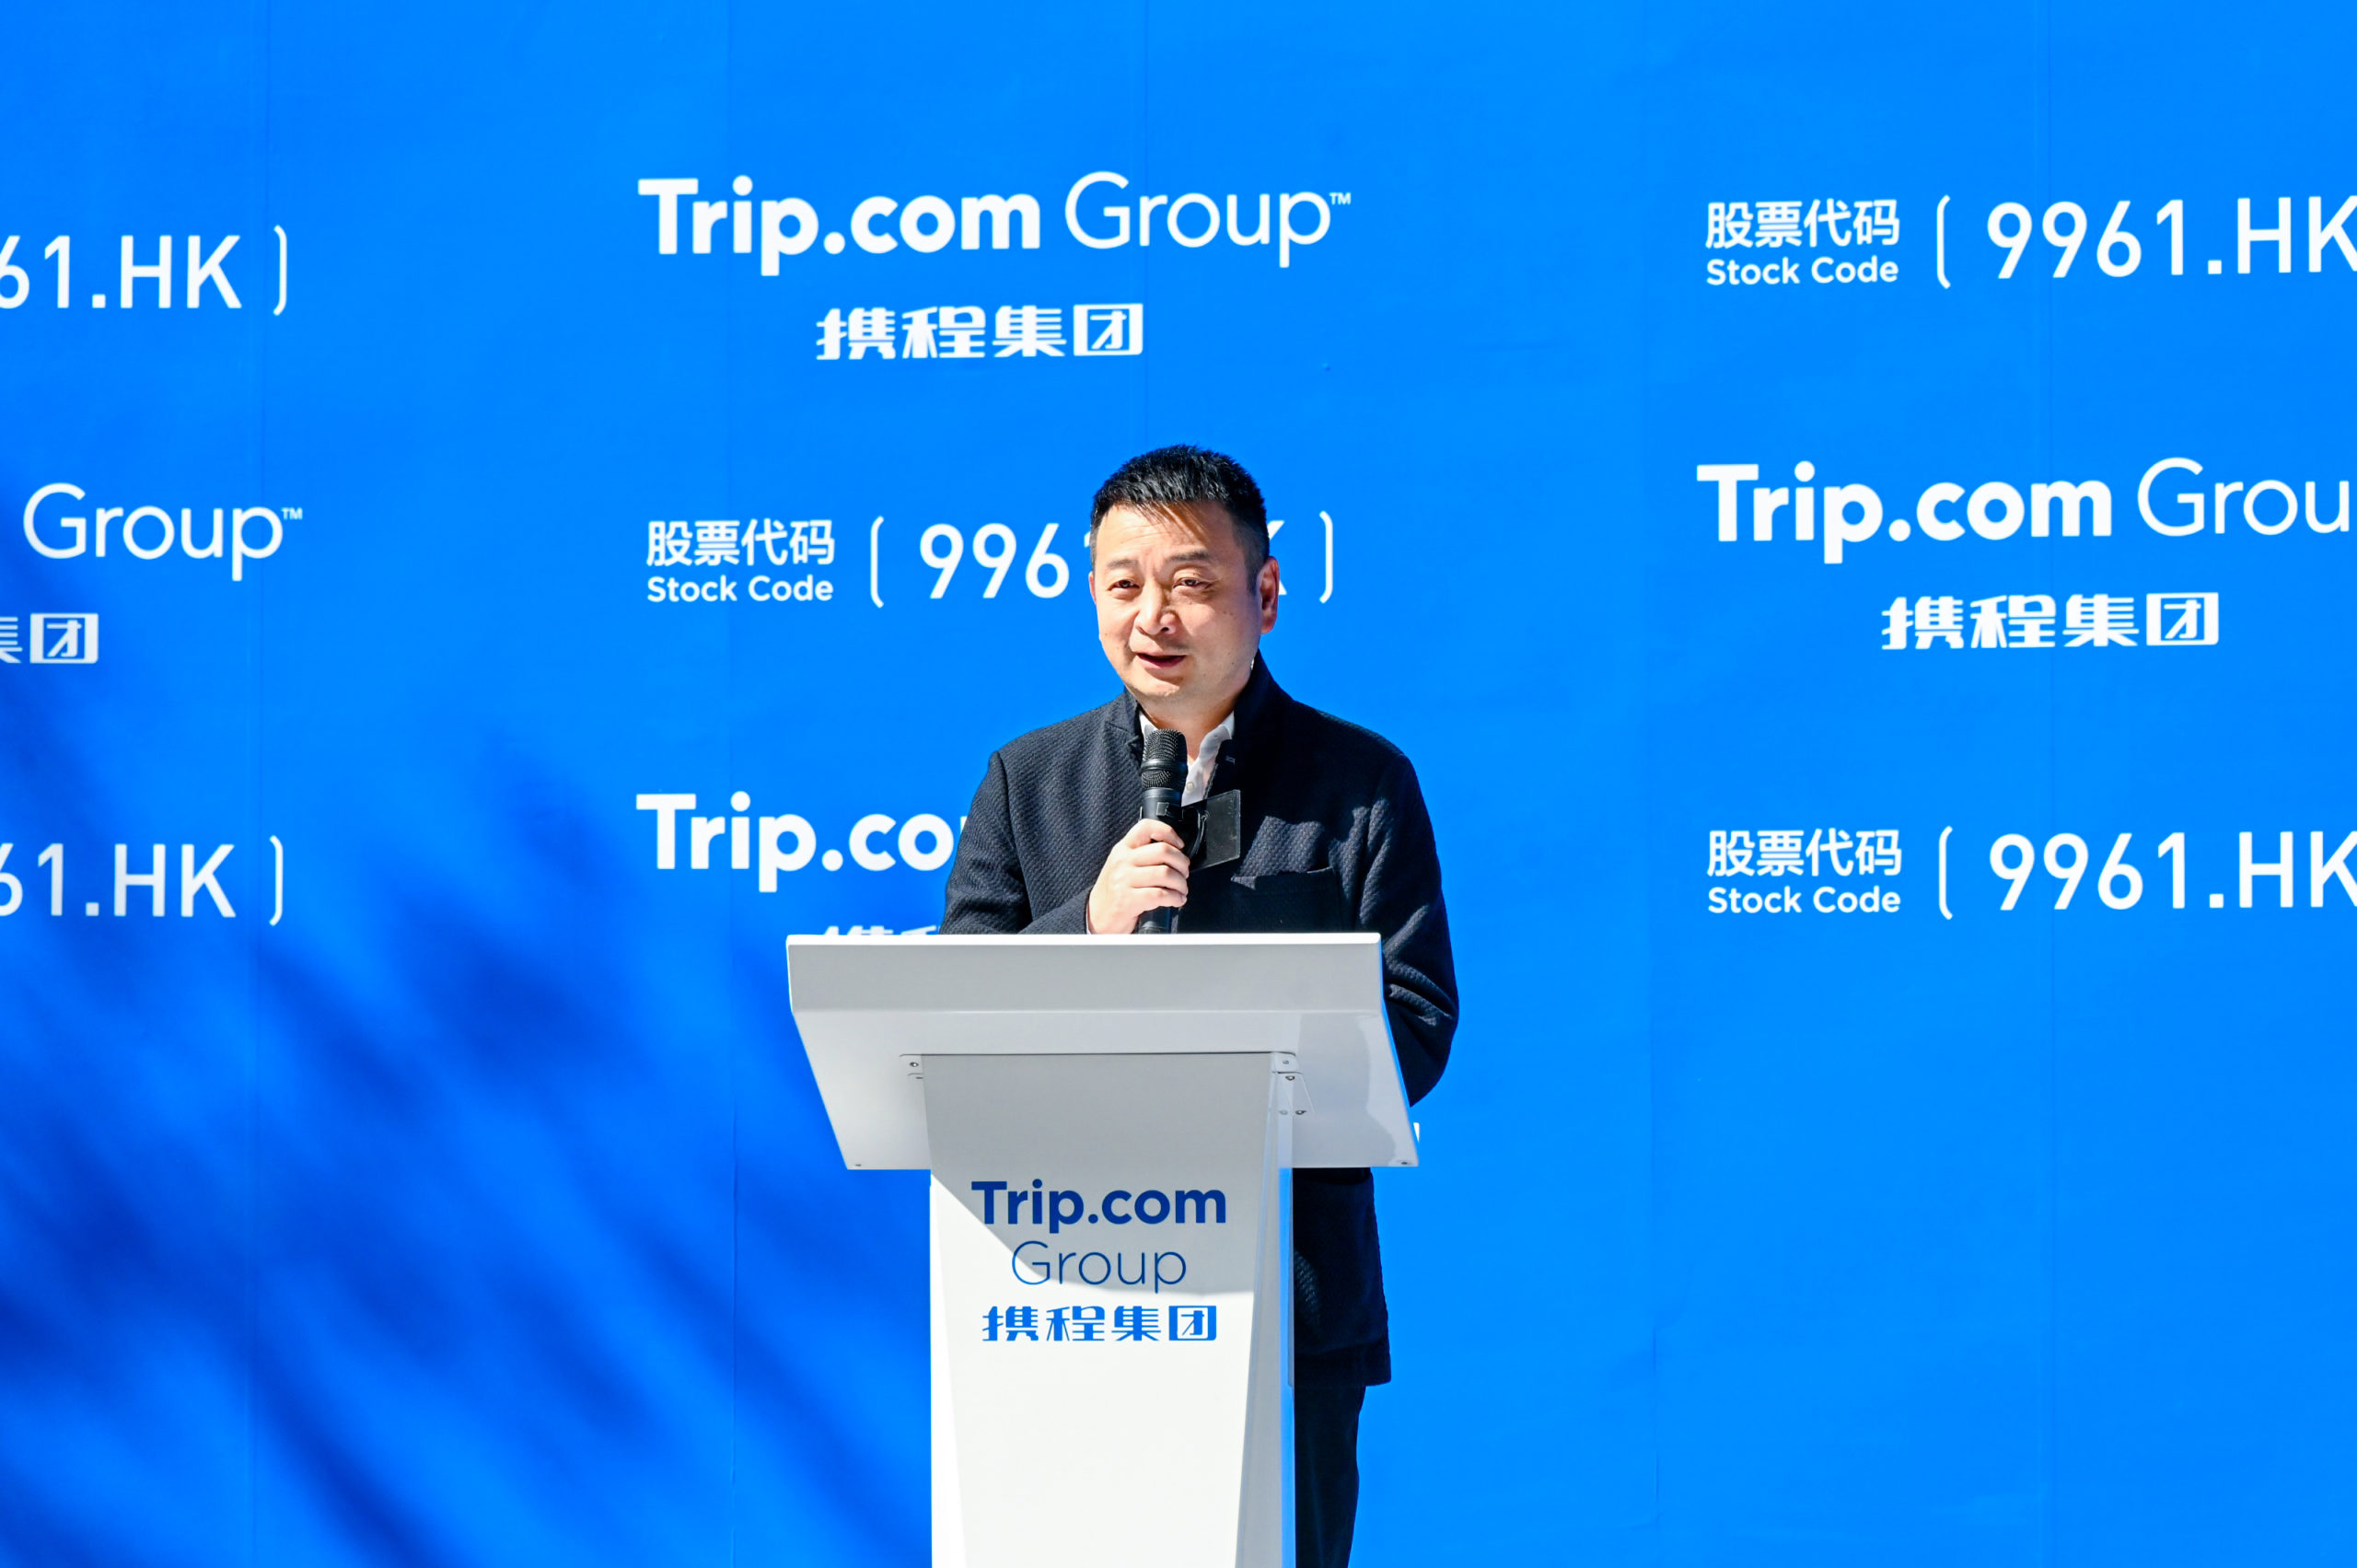 Trip.com co-founder James Liang shares insights about post-pandemic travel